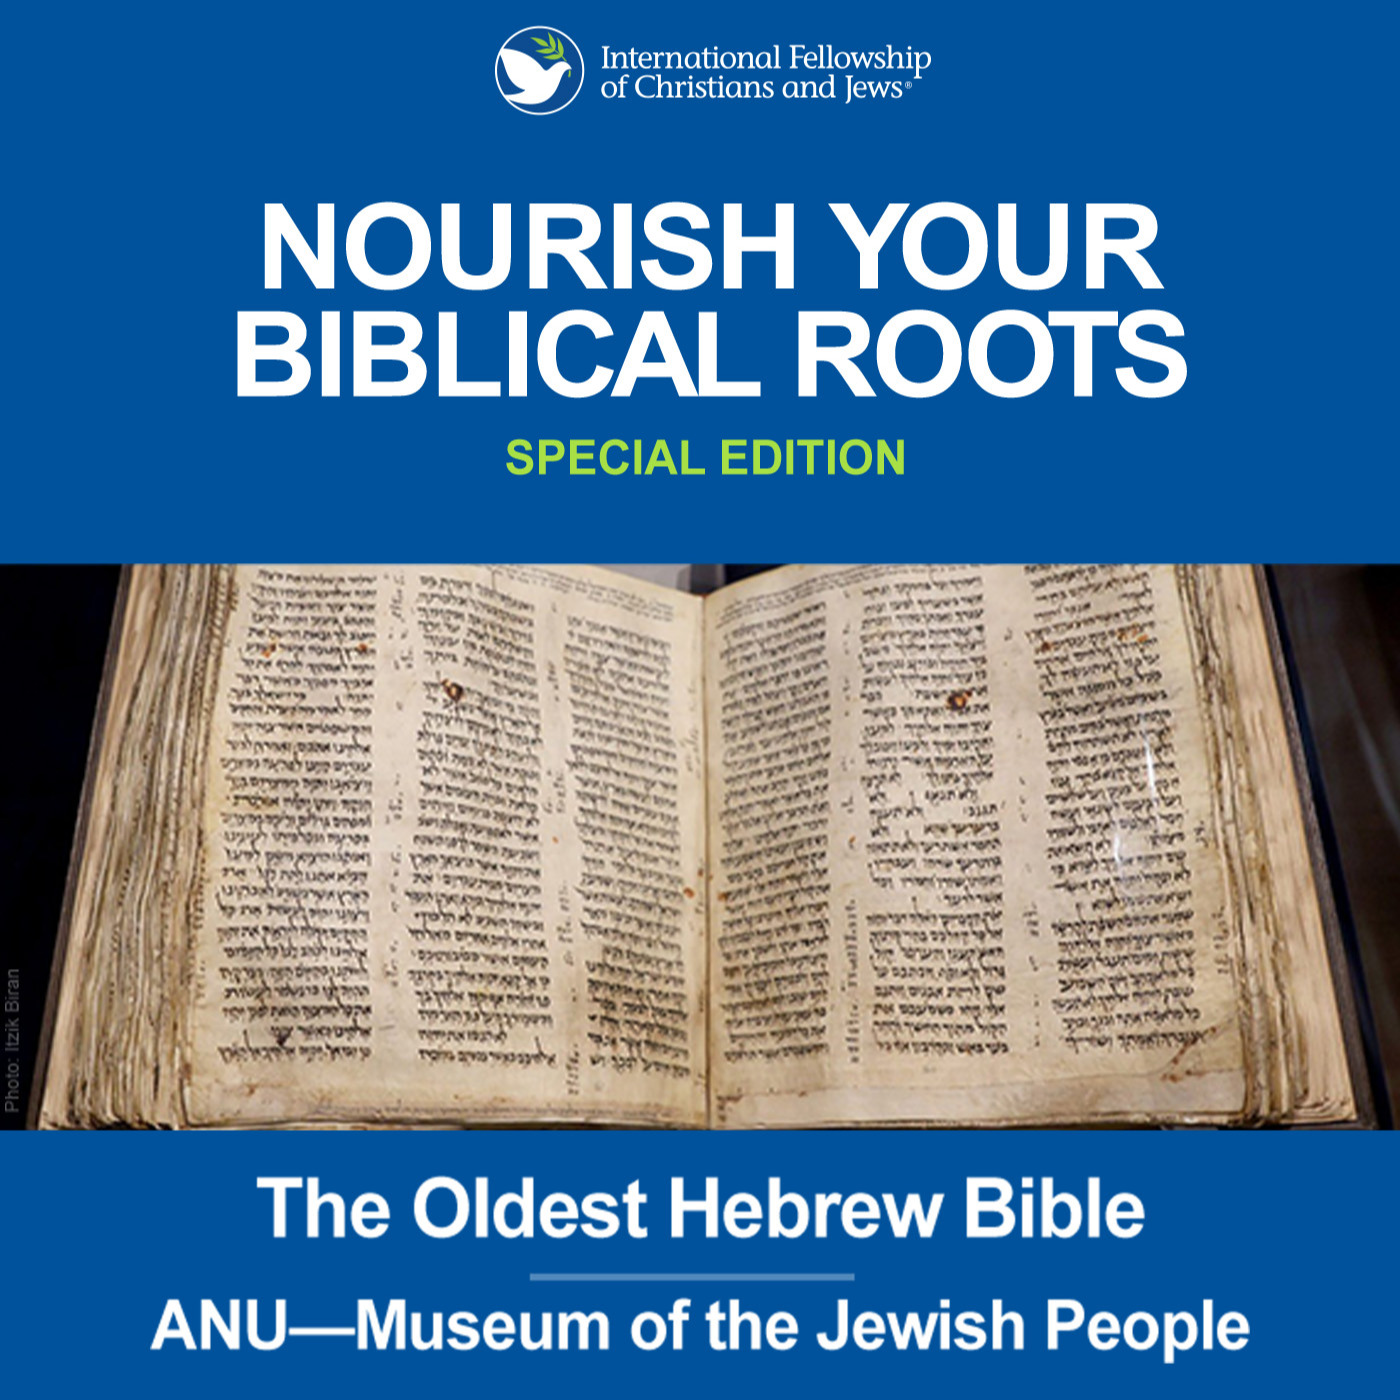 The Oldest Hebrew Bible: ANU— Museum of the Jewish People